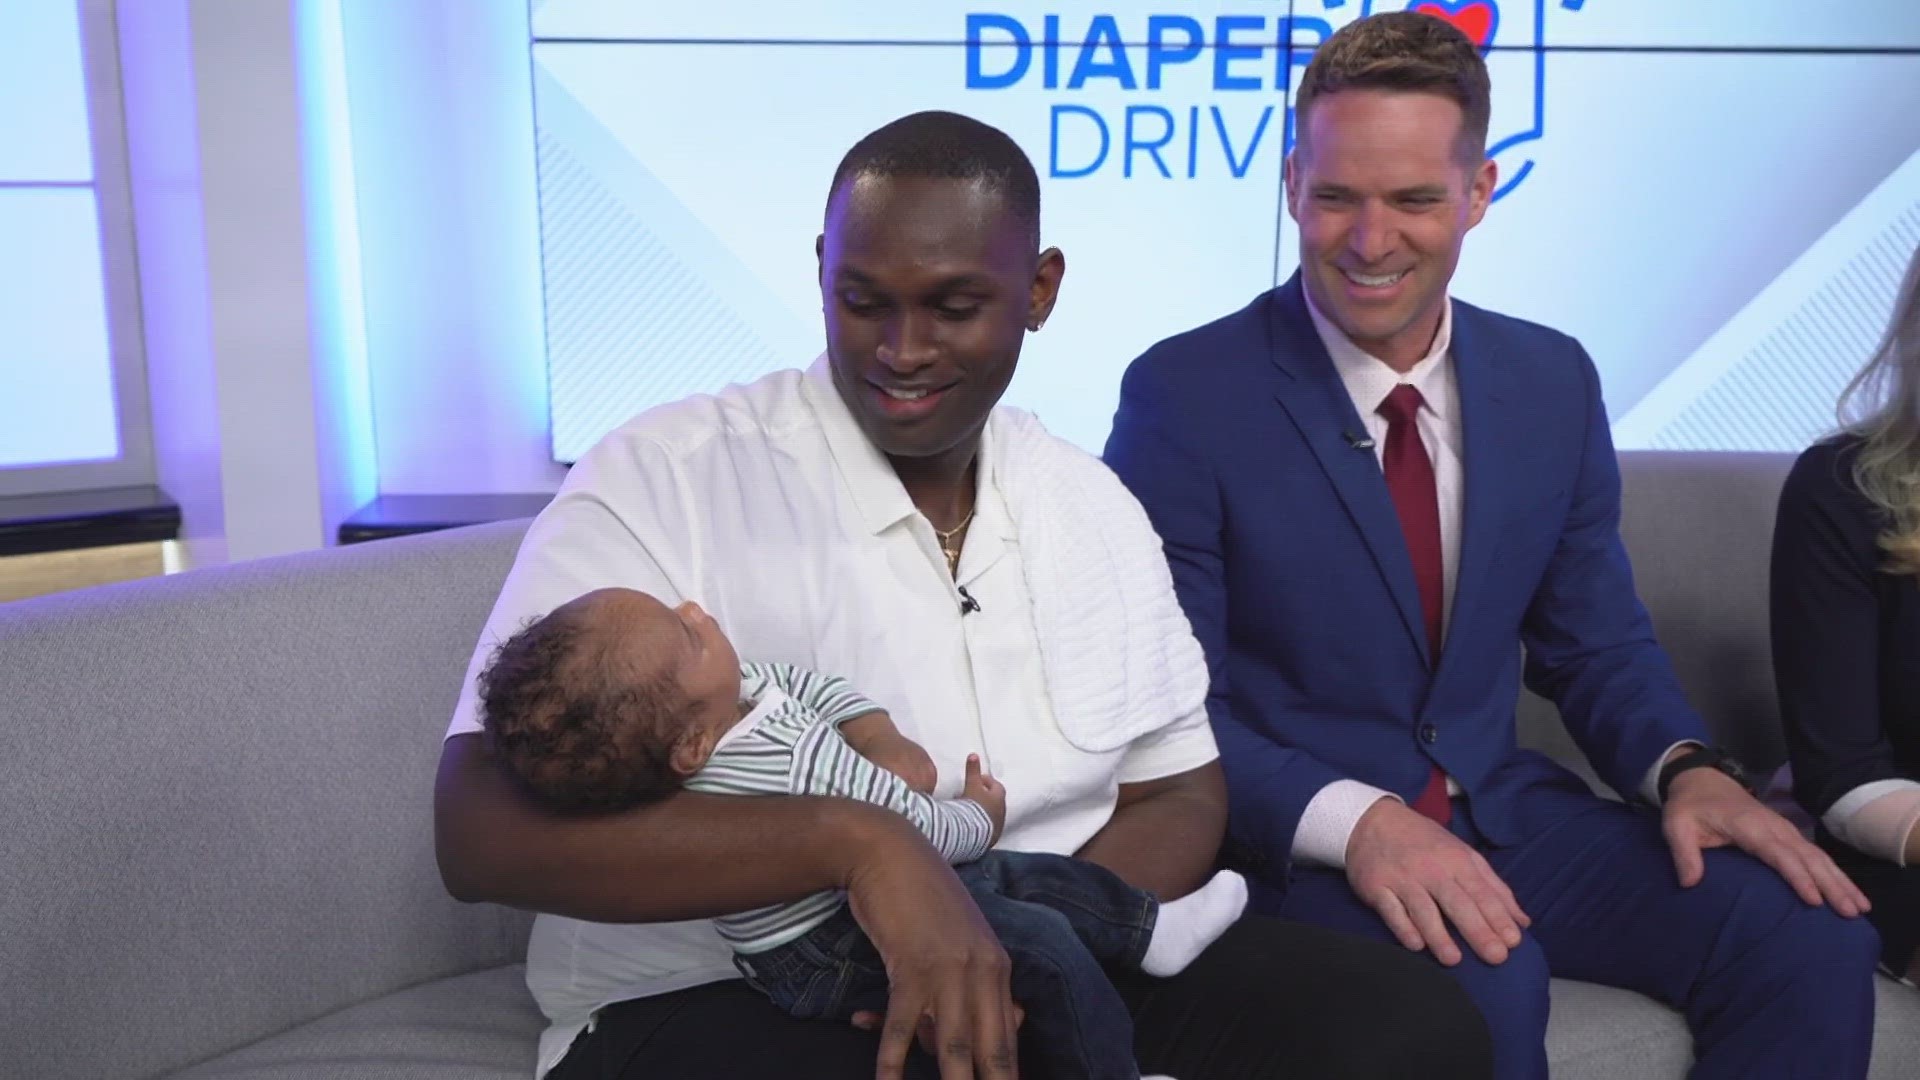 KREM Care's Diaper Drive is underway! Whitney Ward and Mark Hanrahan were joined by the Up With KREM crew as their babies made a TV debut.